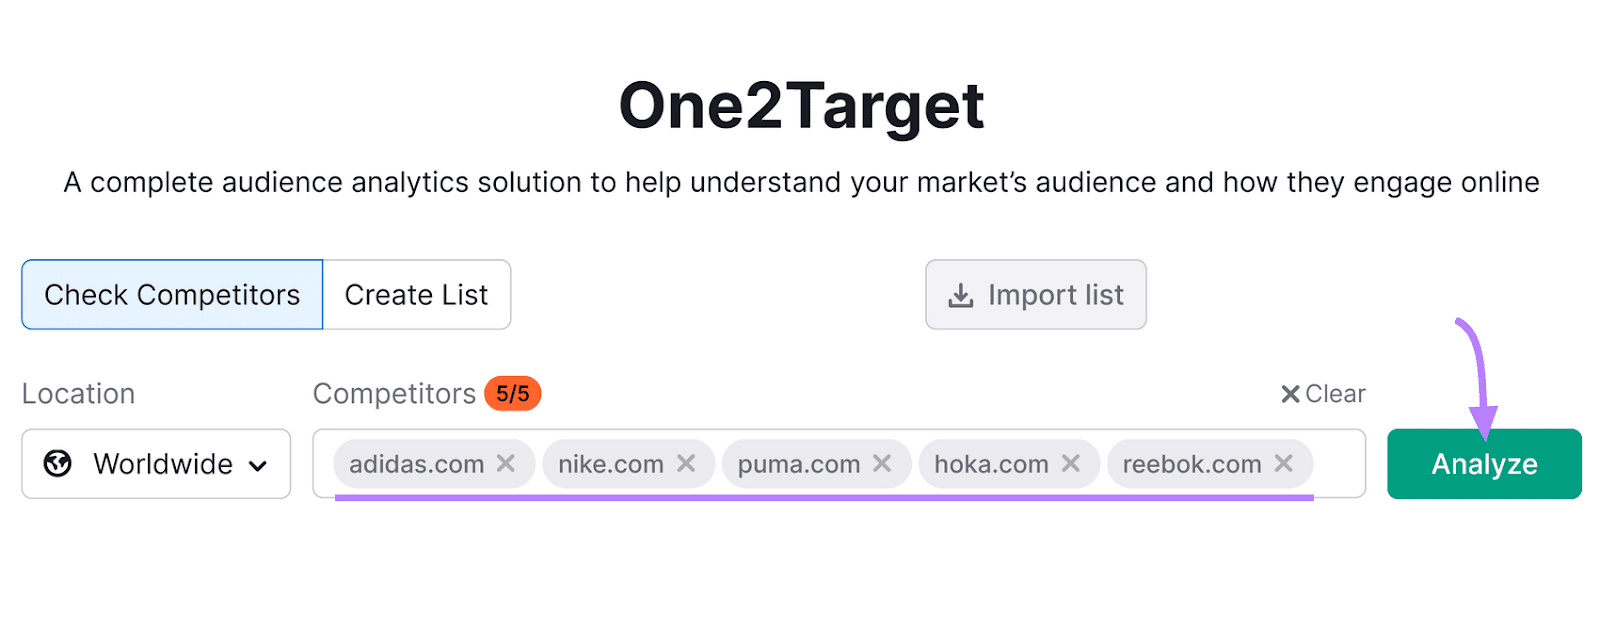 nike.com and 4  competitors' domains entered into the One2Target tool